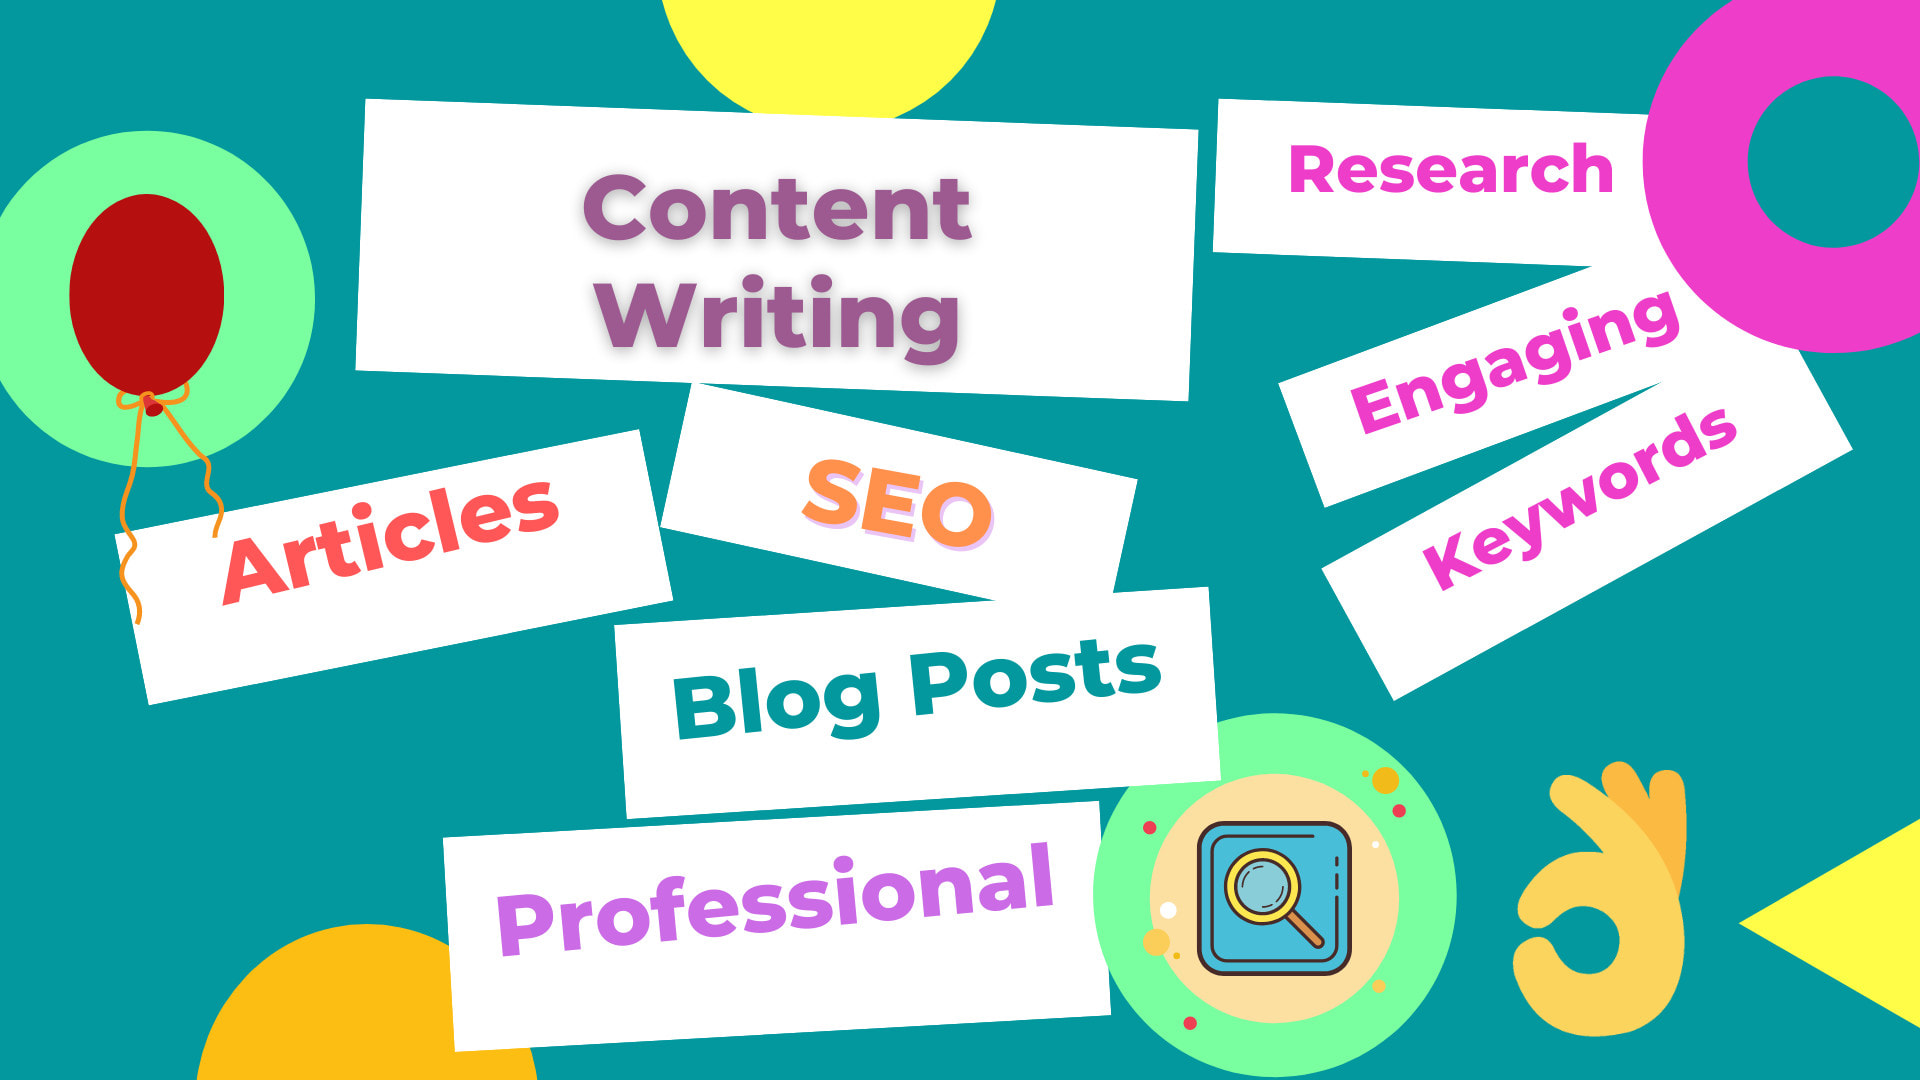 Write seo optimized blog posts and articles by Zarak_writer  Fiverr